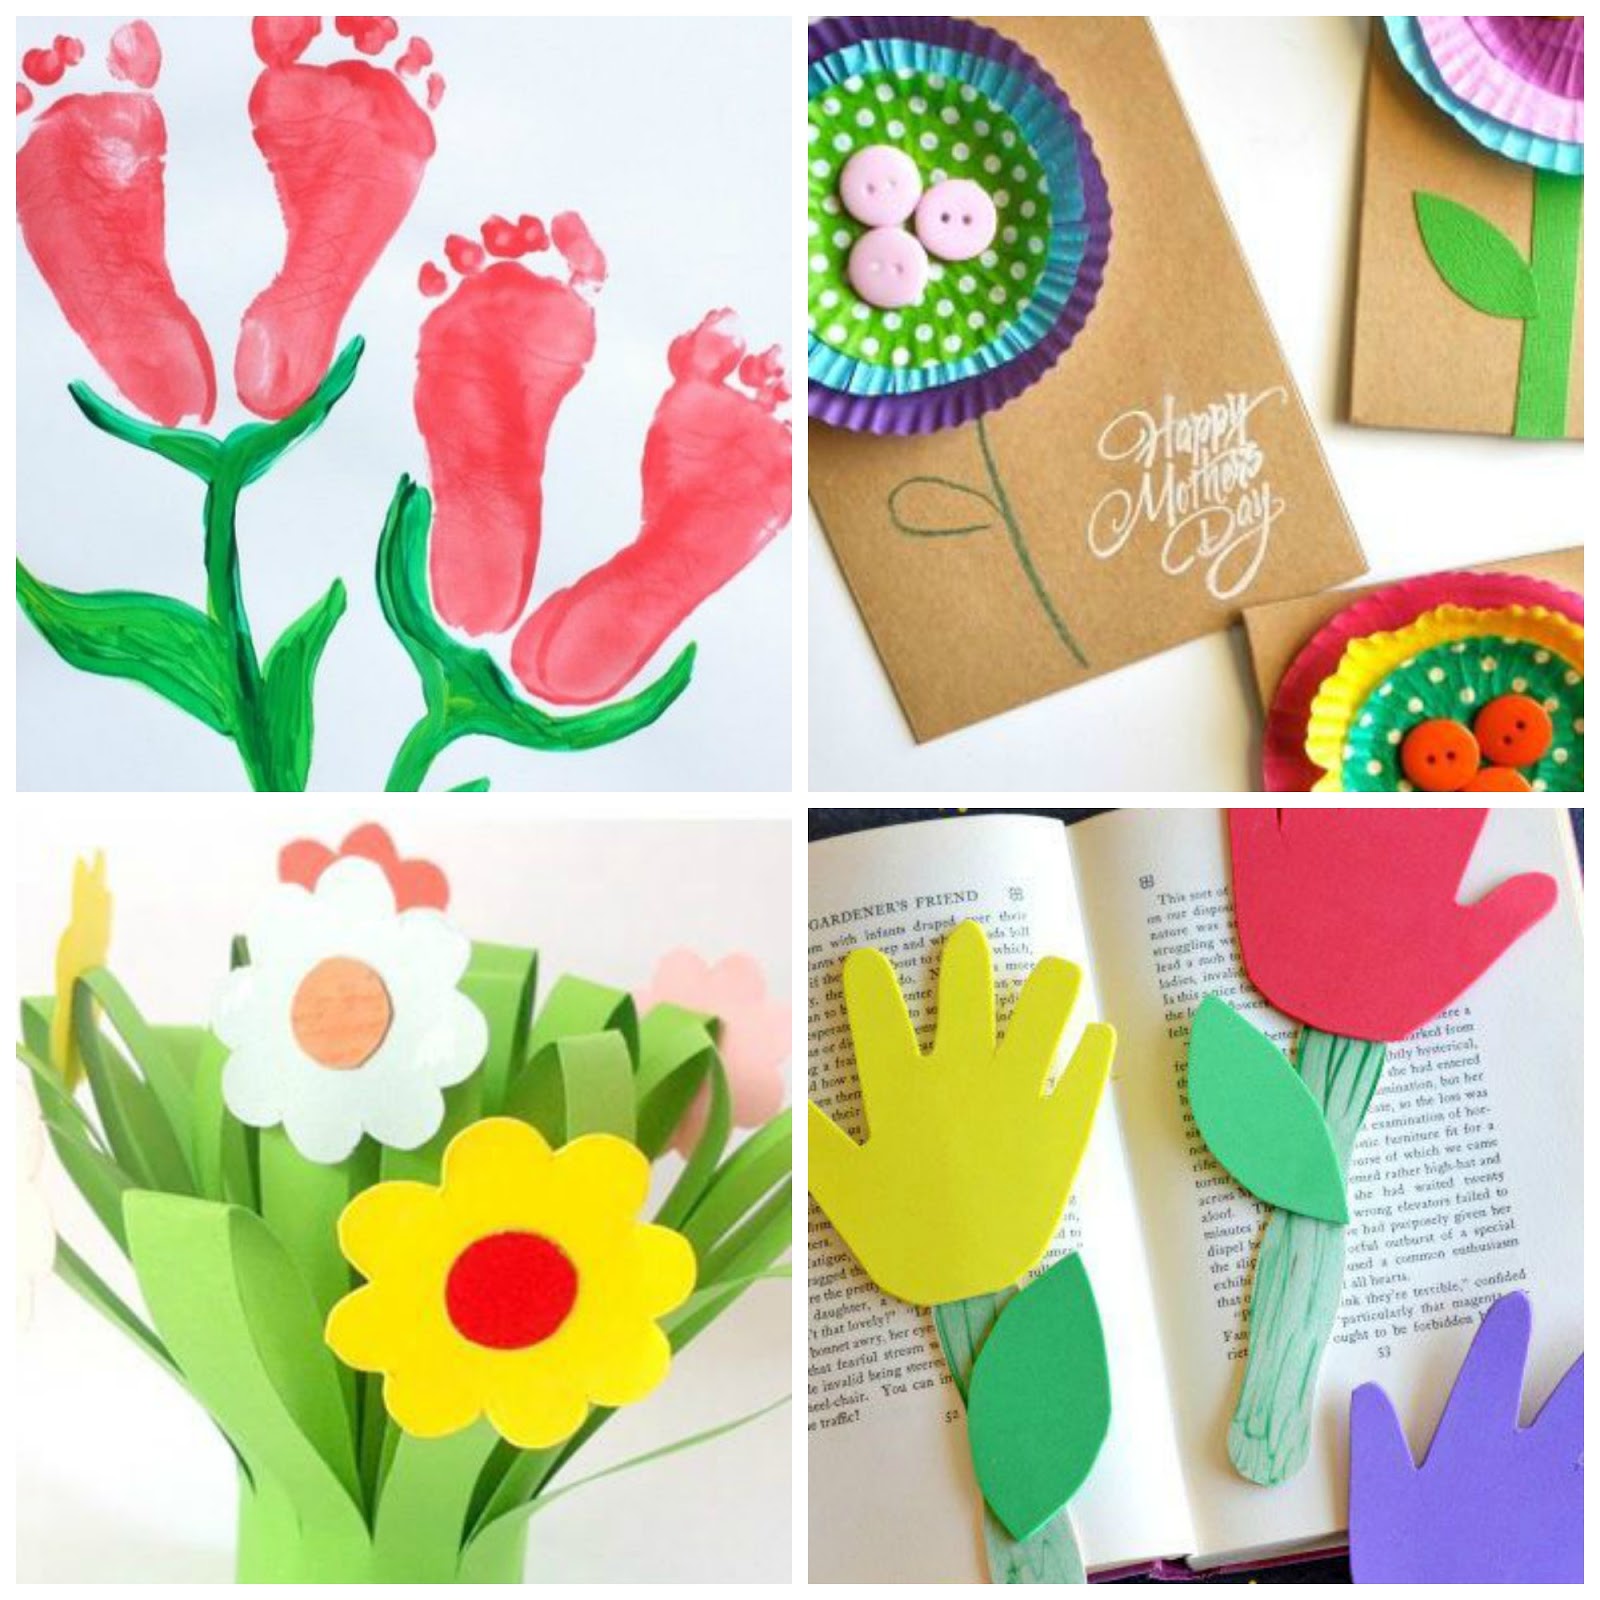 wafflemama-8-mother-s-day-craft-ideas-for-kids